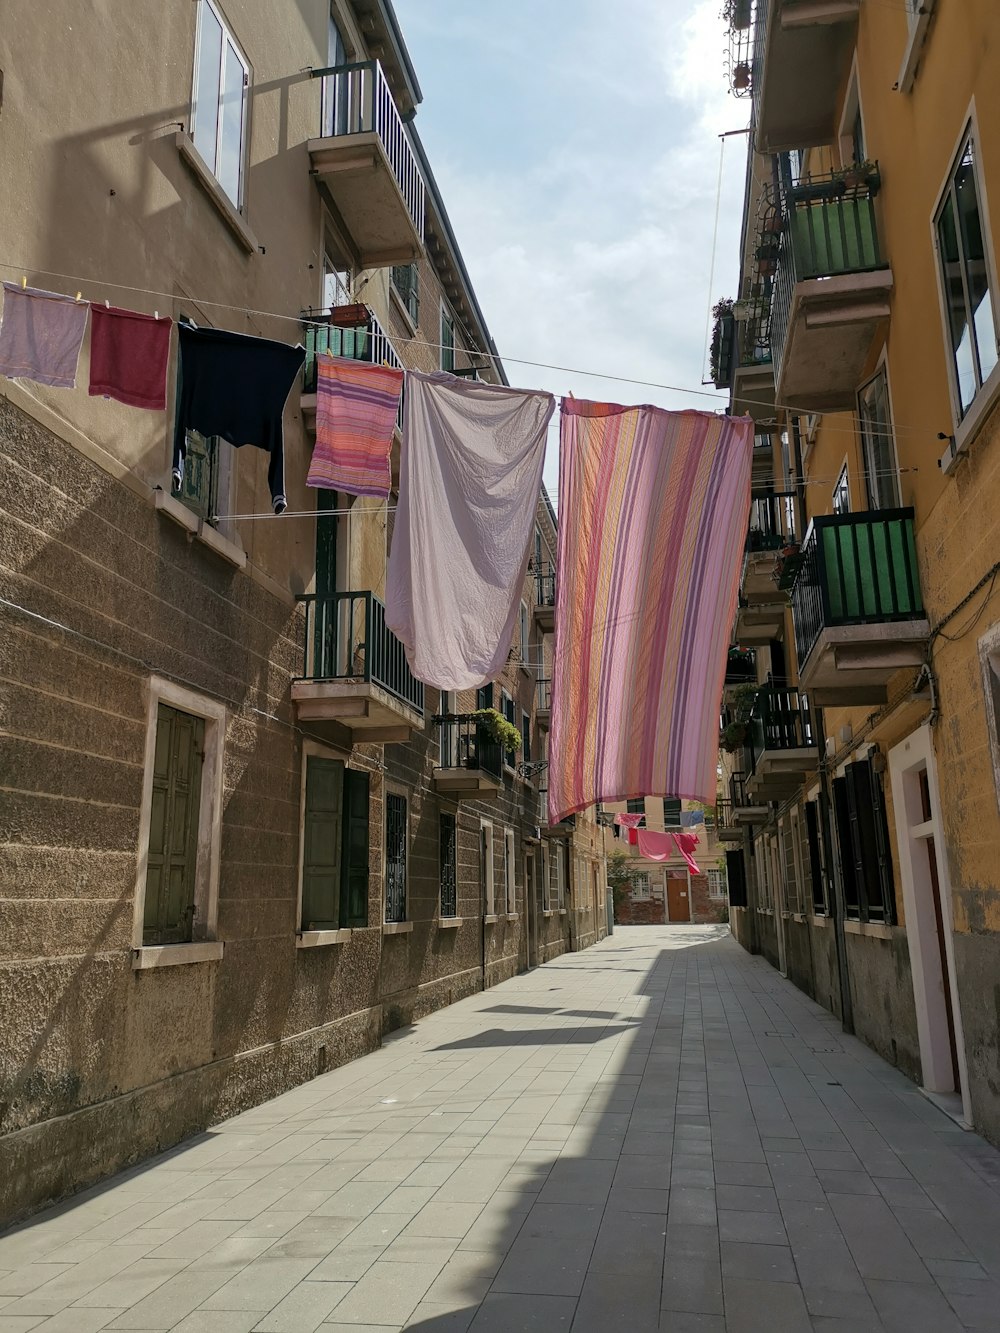 a city street lined with buildings and laundry hanging from a line